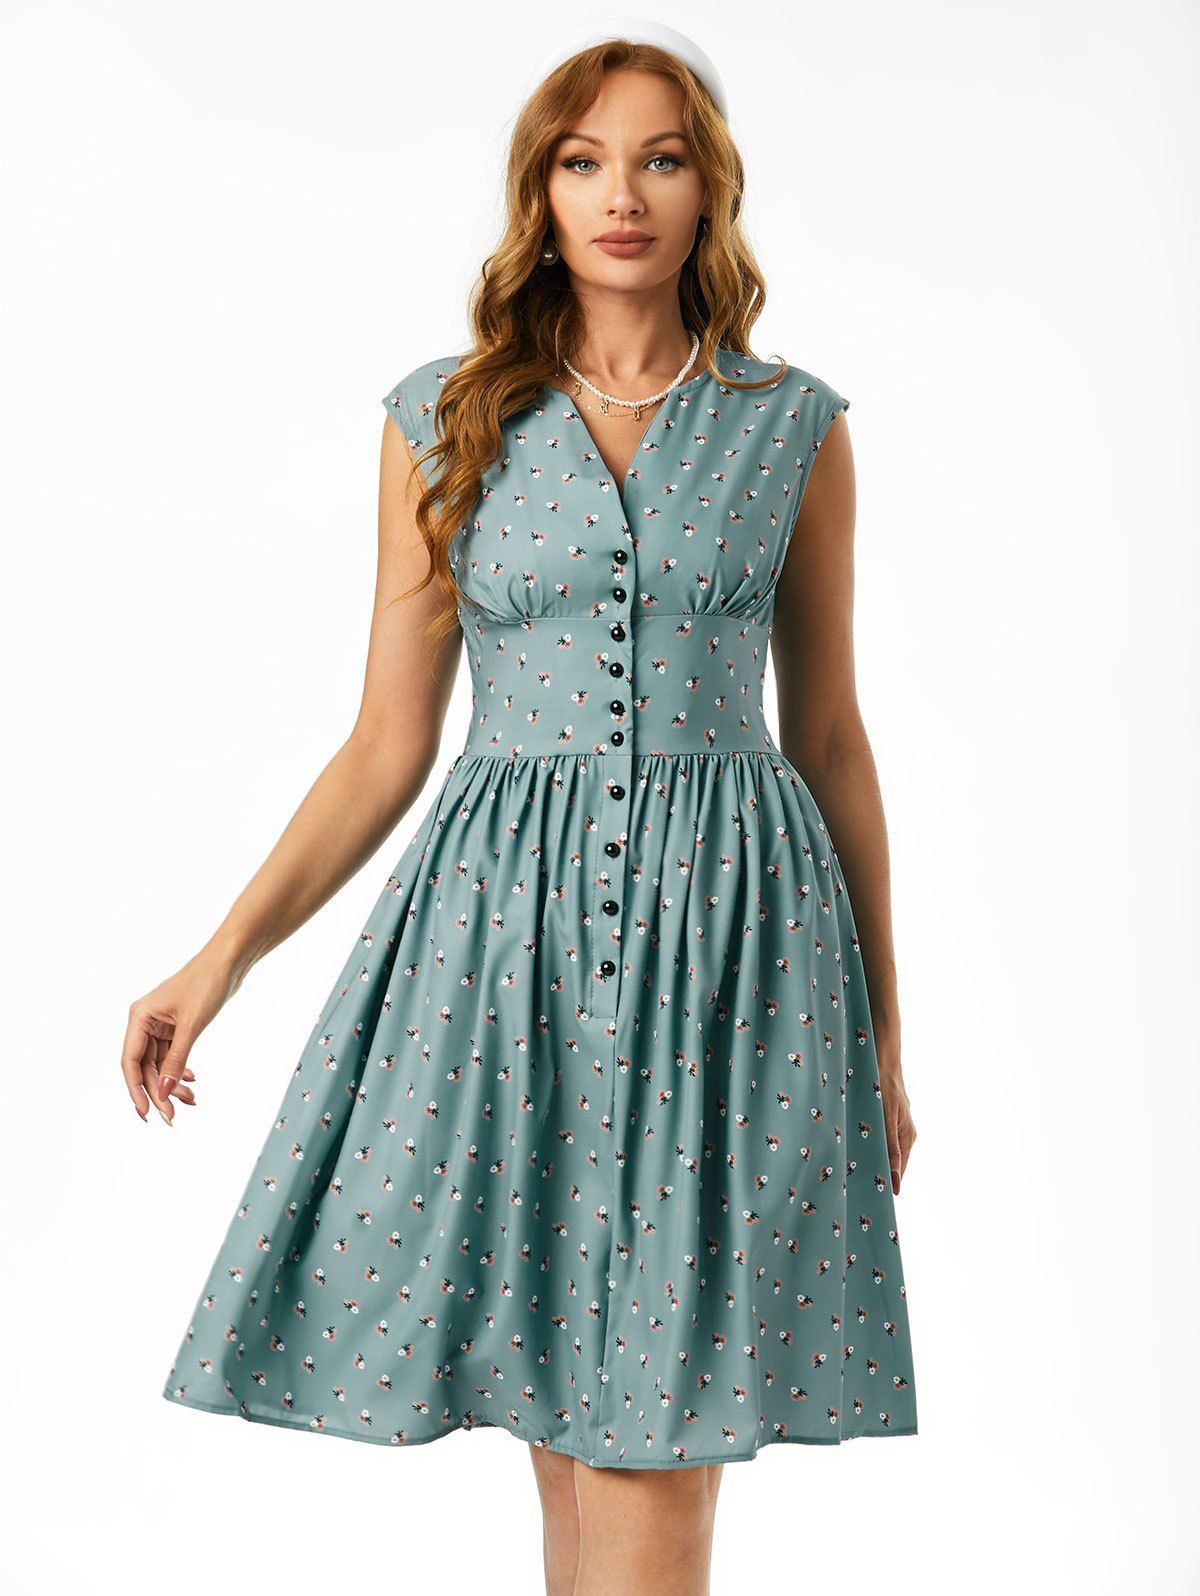 Button Front Notched Collar Ditsy Floral Dress - LIGHT BLUE L